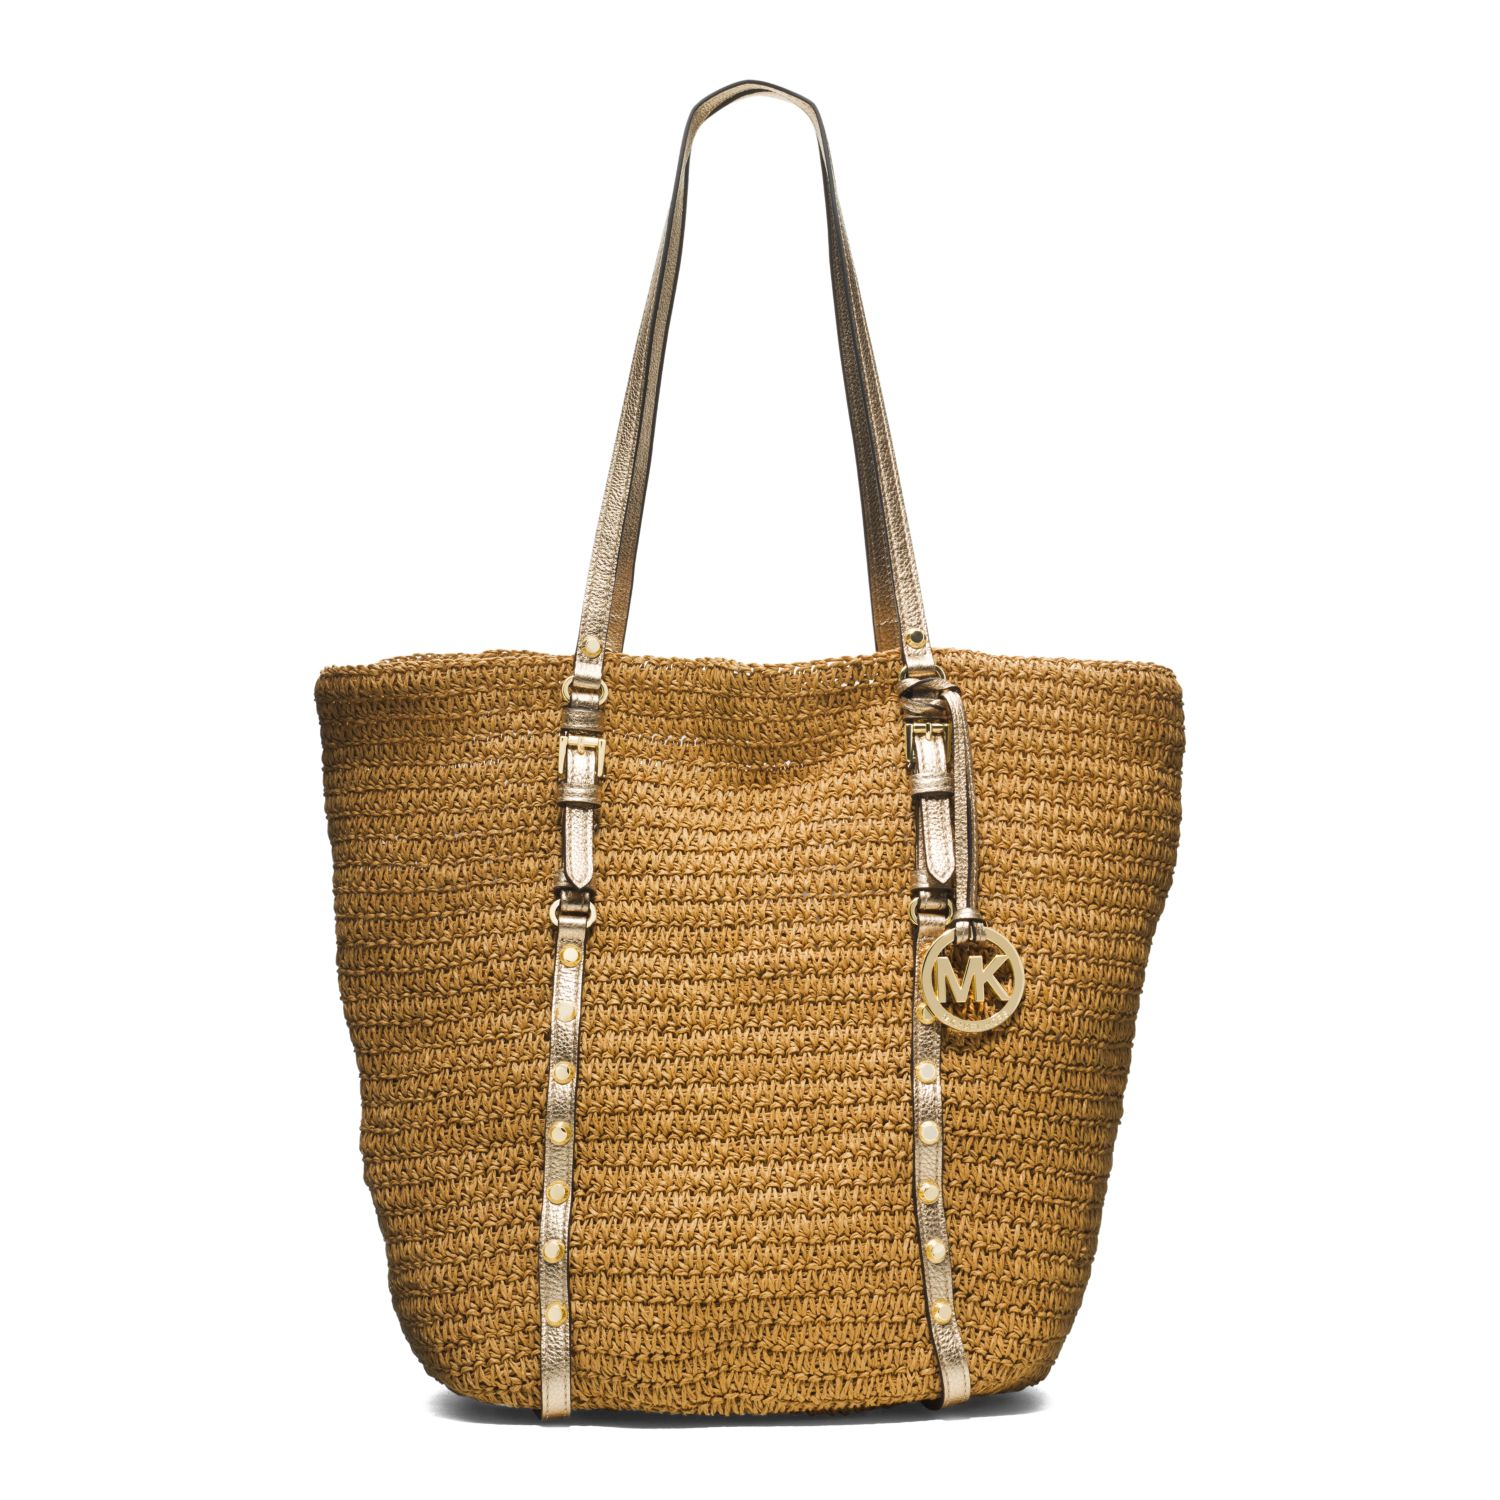 Michael Kors Large Studded Straw Shopper Tote in Beige (CREAM COMBO) | Lyst